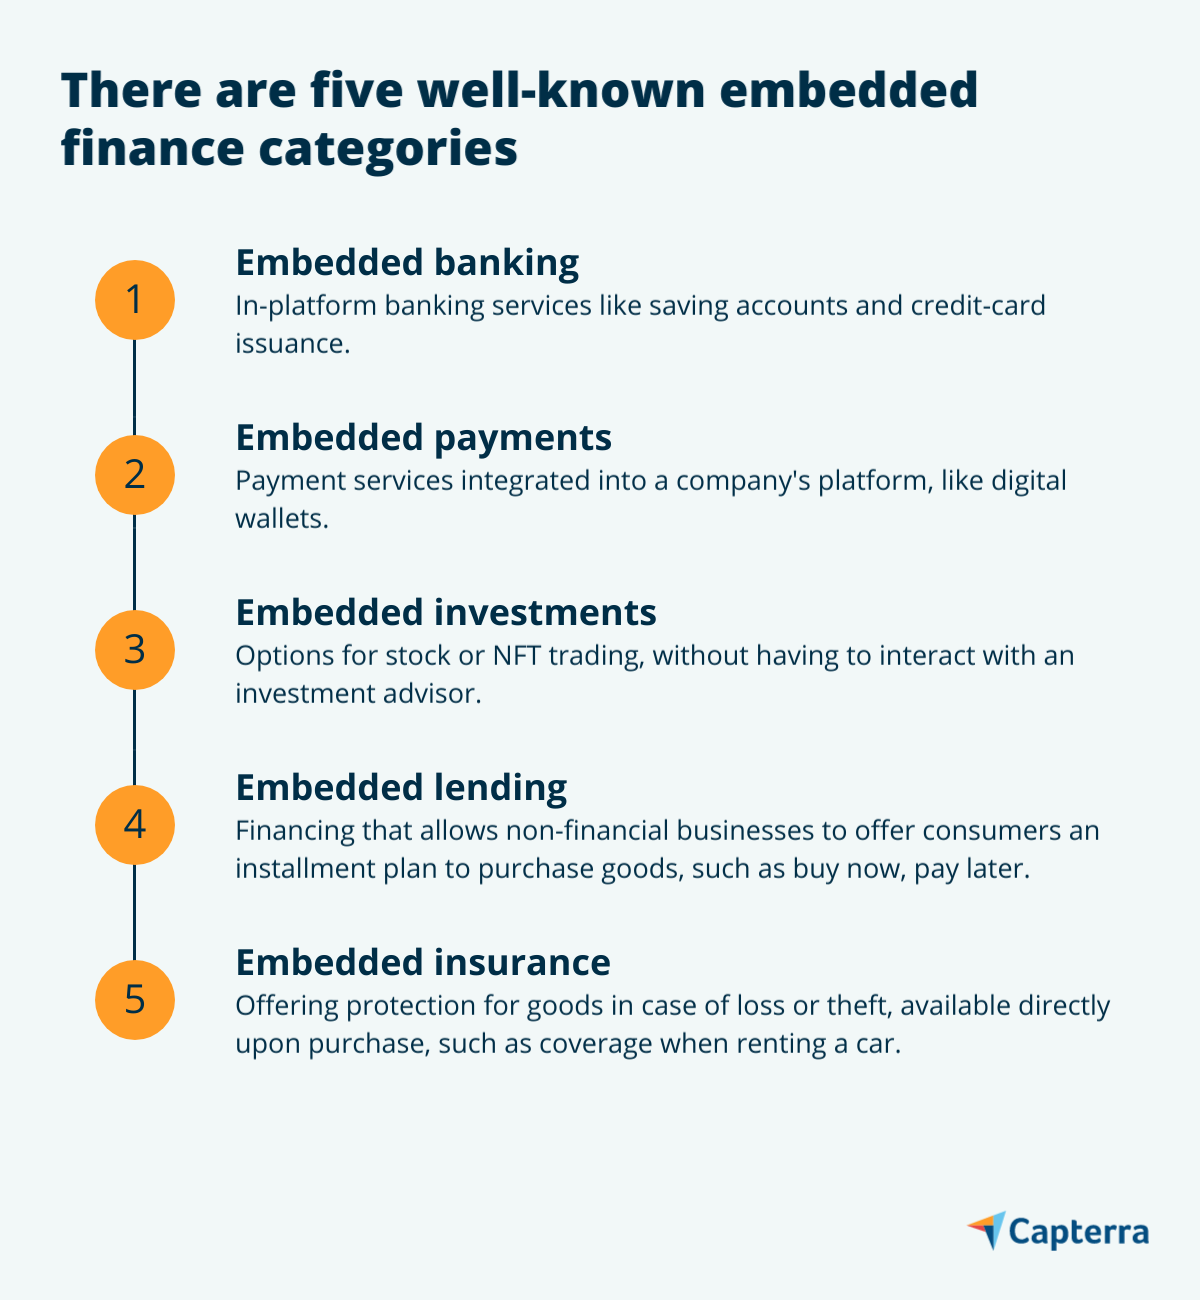 List of embedded finance categories graphic for the blog article "Navigating the Hype of Embedded Finance: 5 Trends to Keep on Your Radar"